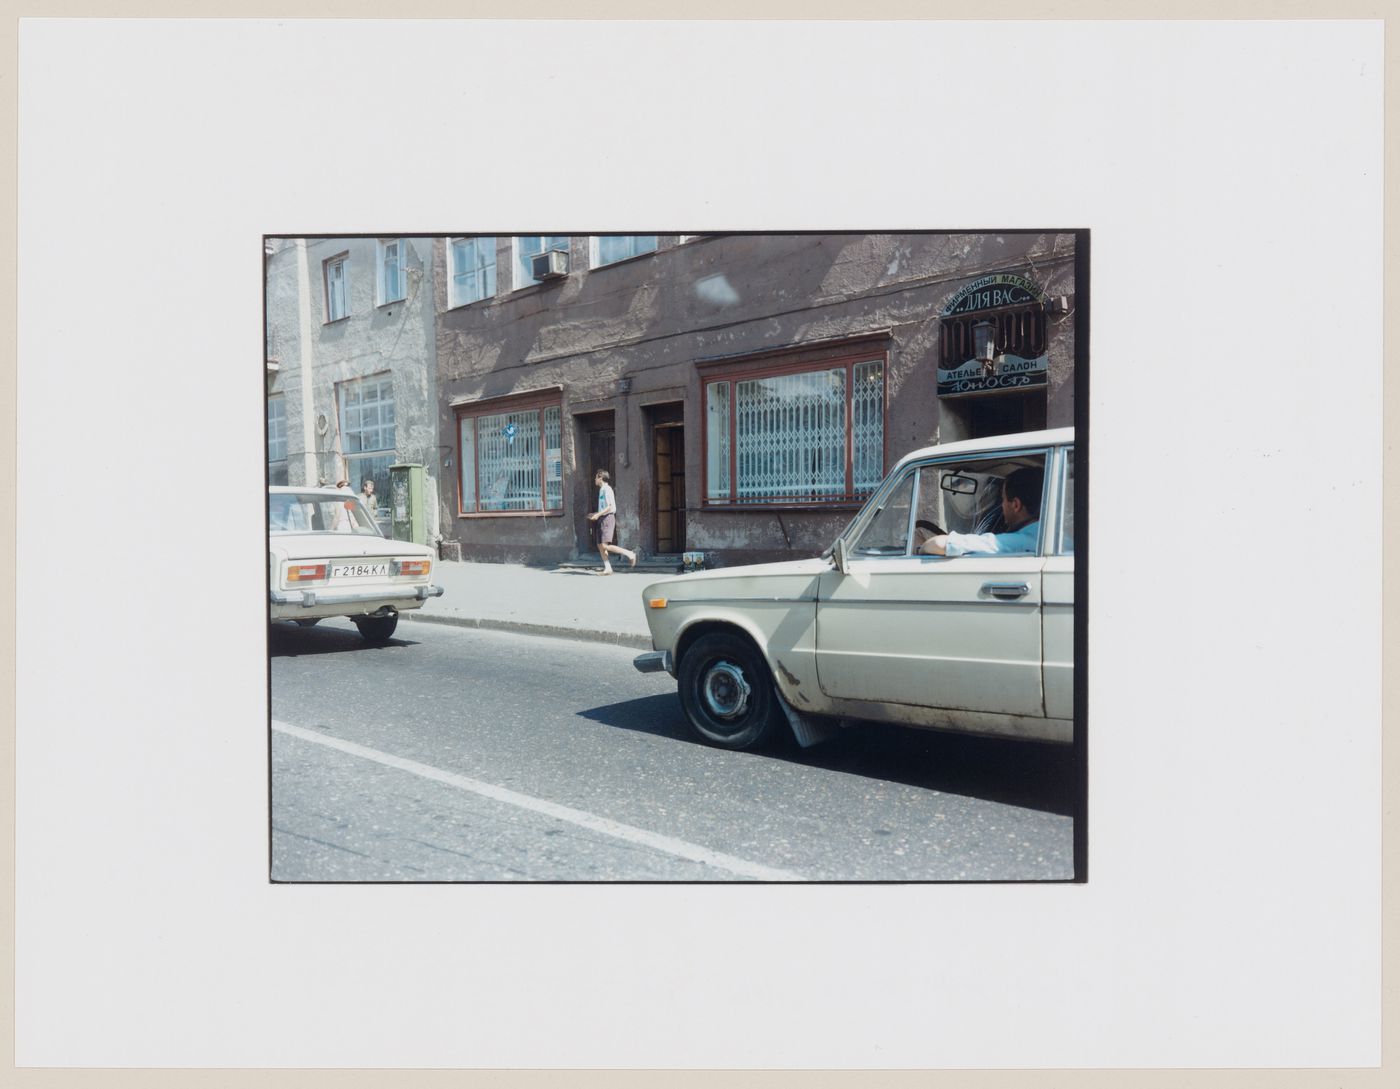 View of automobiles, buildings, a street and people, Kaliningrad, Kaliningradskaia oblast', Russia (from the series "In between cities")